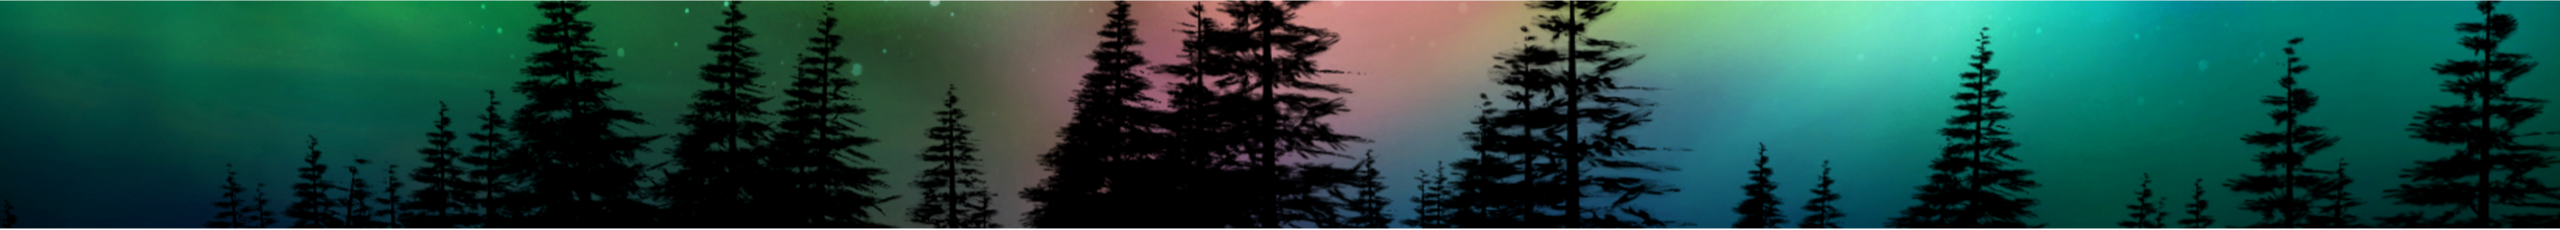 Associated Labels case study header banner - night forest